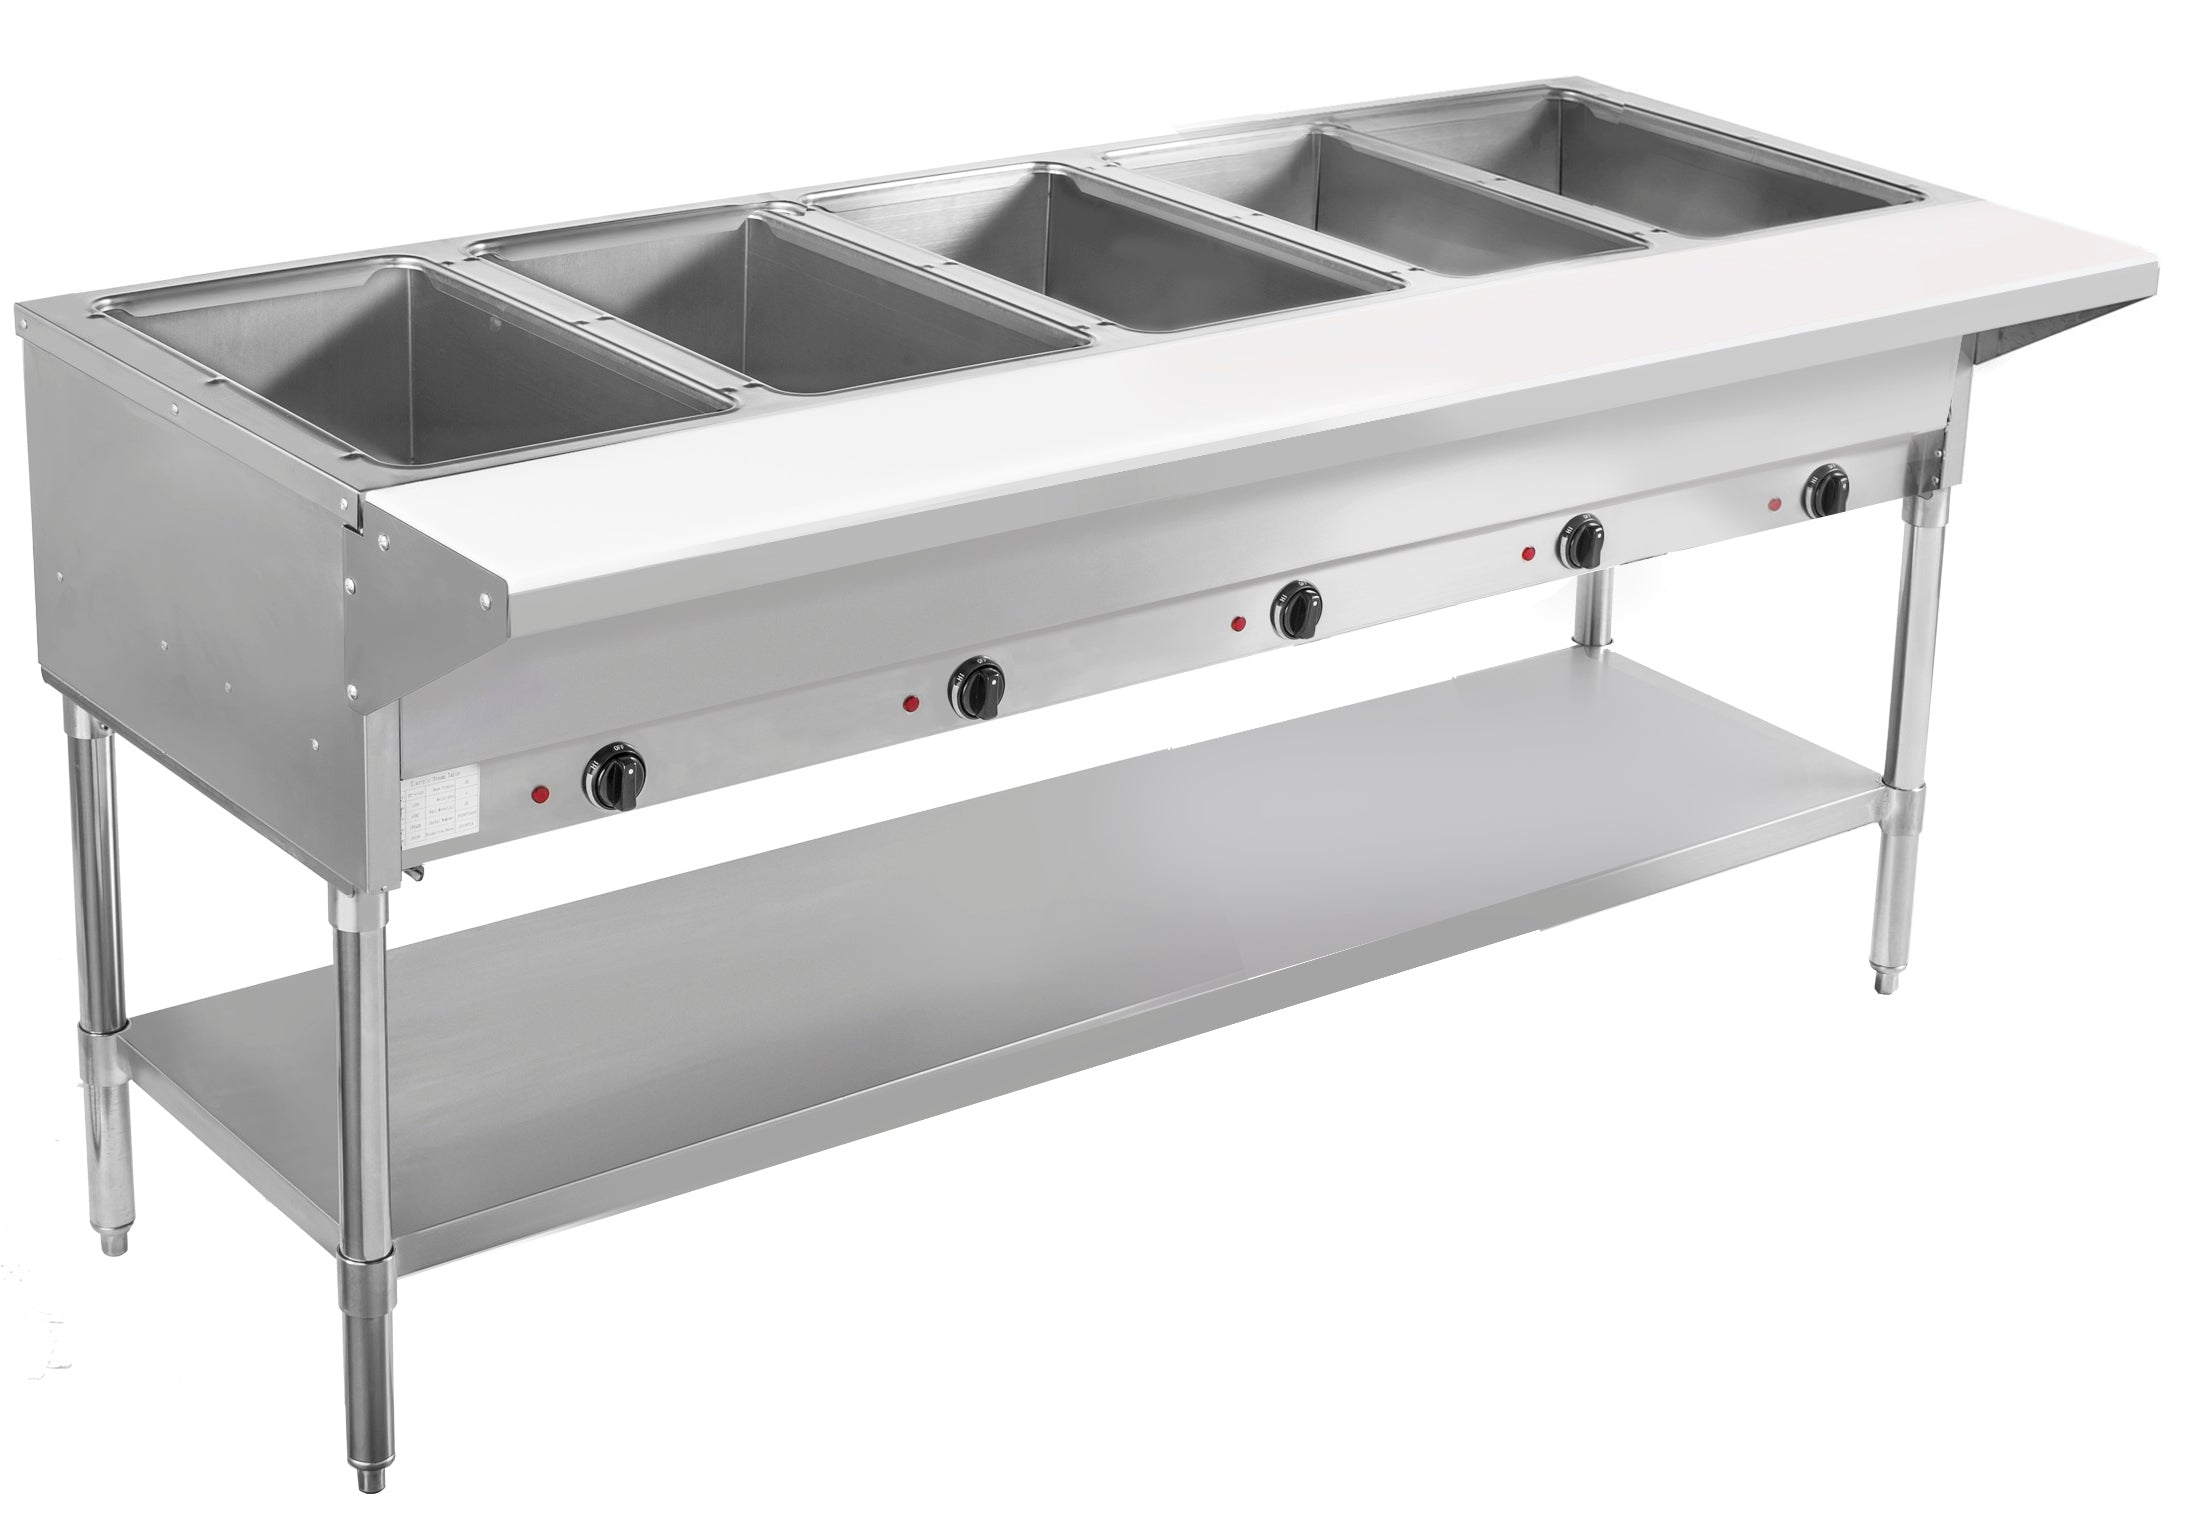 BevLes - BVST-5-240, BevLes 5 Well Electric Steam Table, 230V, in Silver